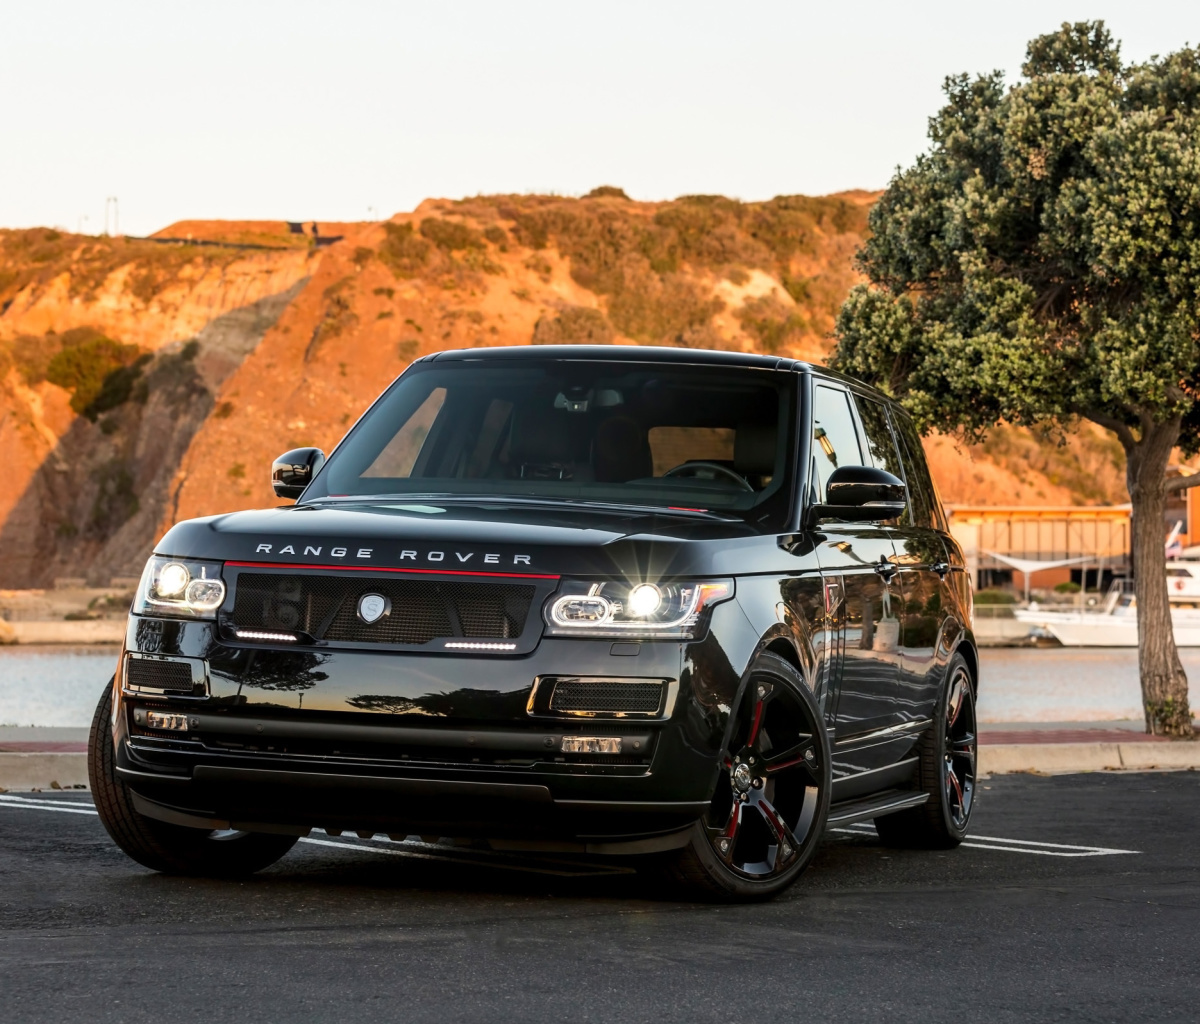 Range Rover STRUT with Grille Package wallpaper 1200x1024